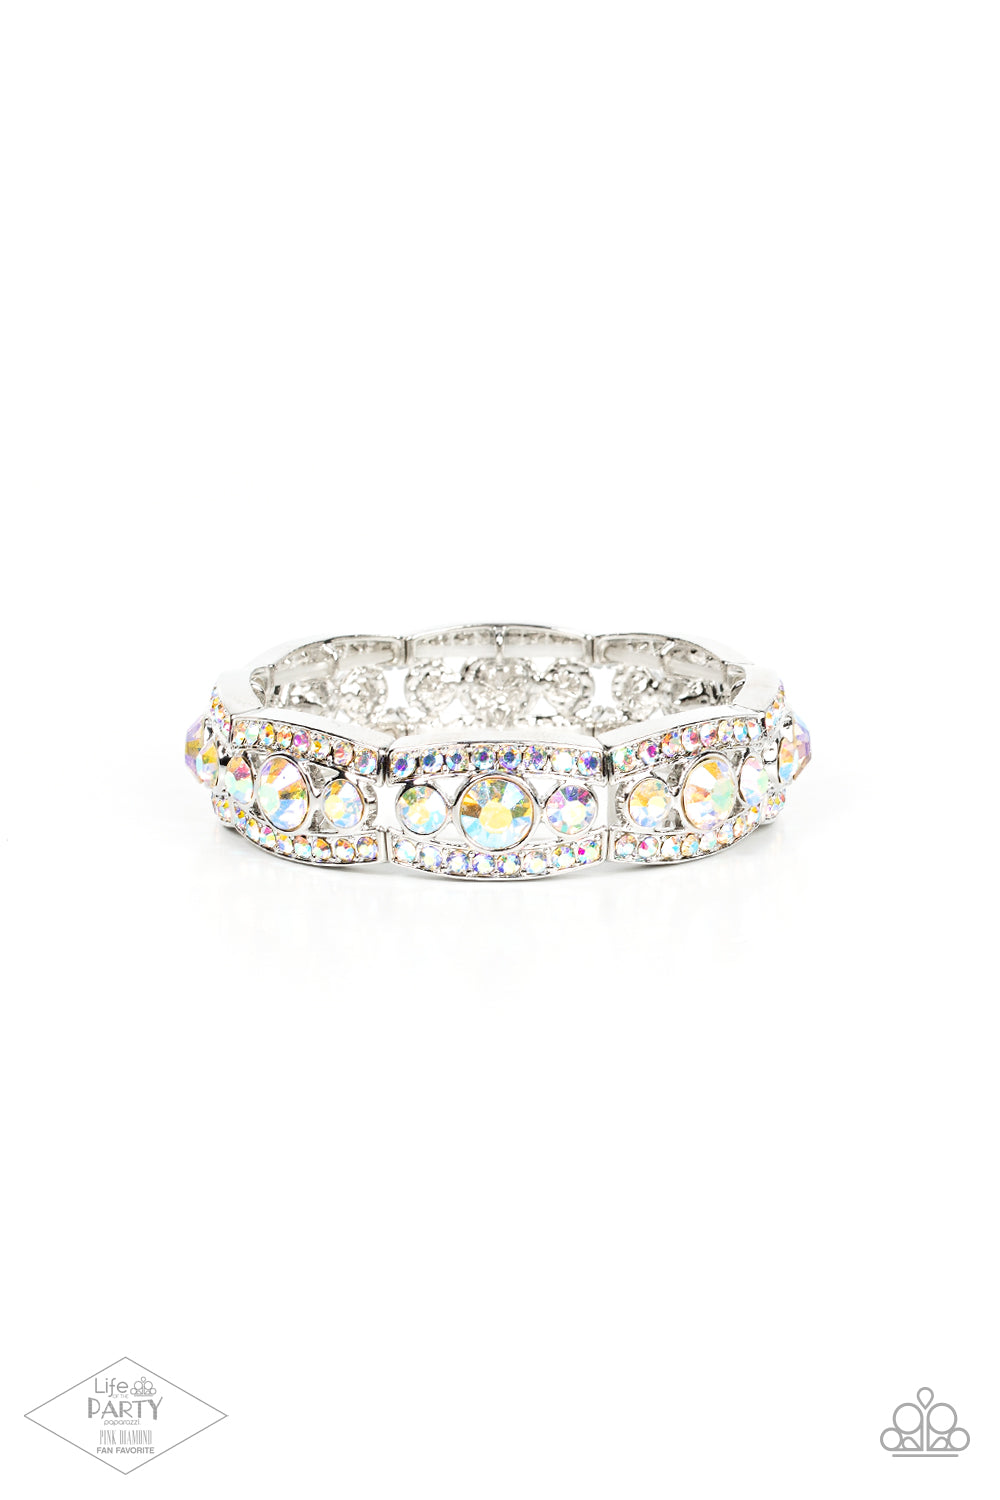 Iridescent rhinestone encrusted silver bars flank a dazzling trio of oversized iridescent rhinestones, coalescing into a glittery frame. The sparkly frames are threaded along stretchy bands around the wrist, creating an irresistible shimmer.  Sold as one individual bracelet.   FANFAVORITE